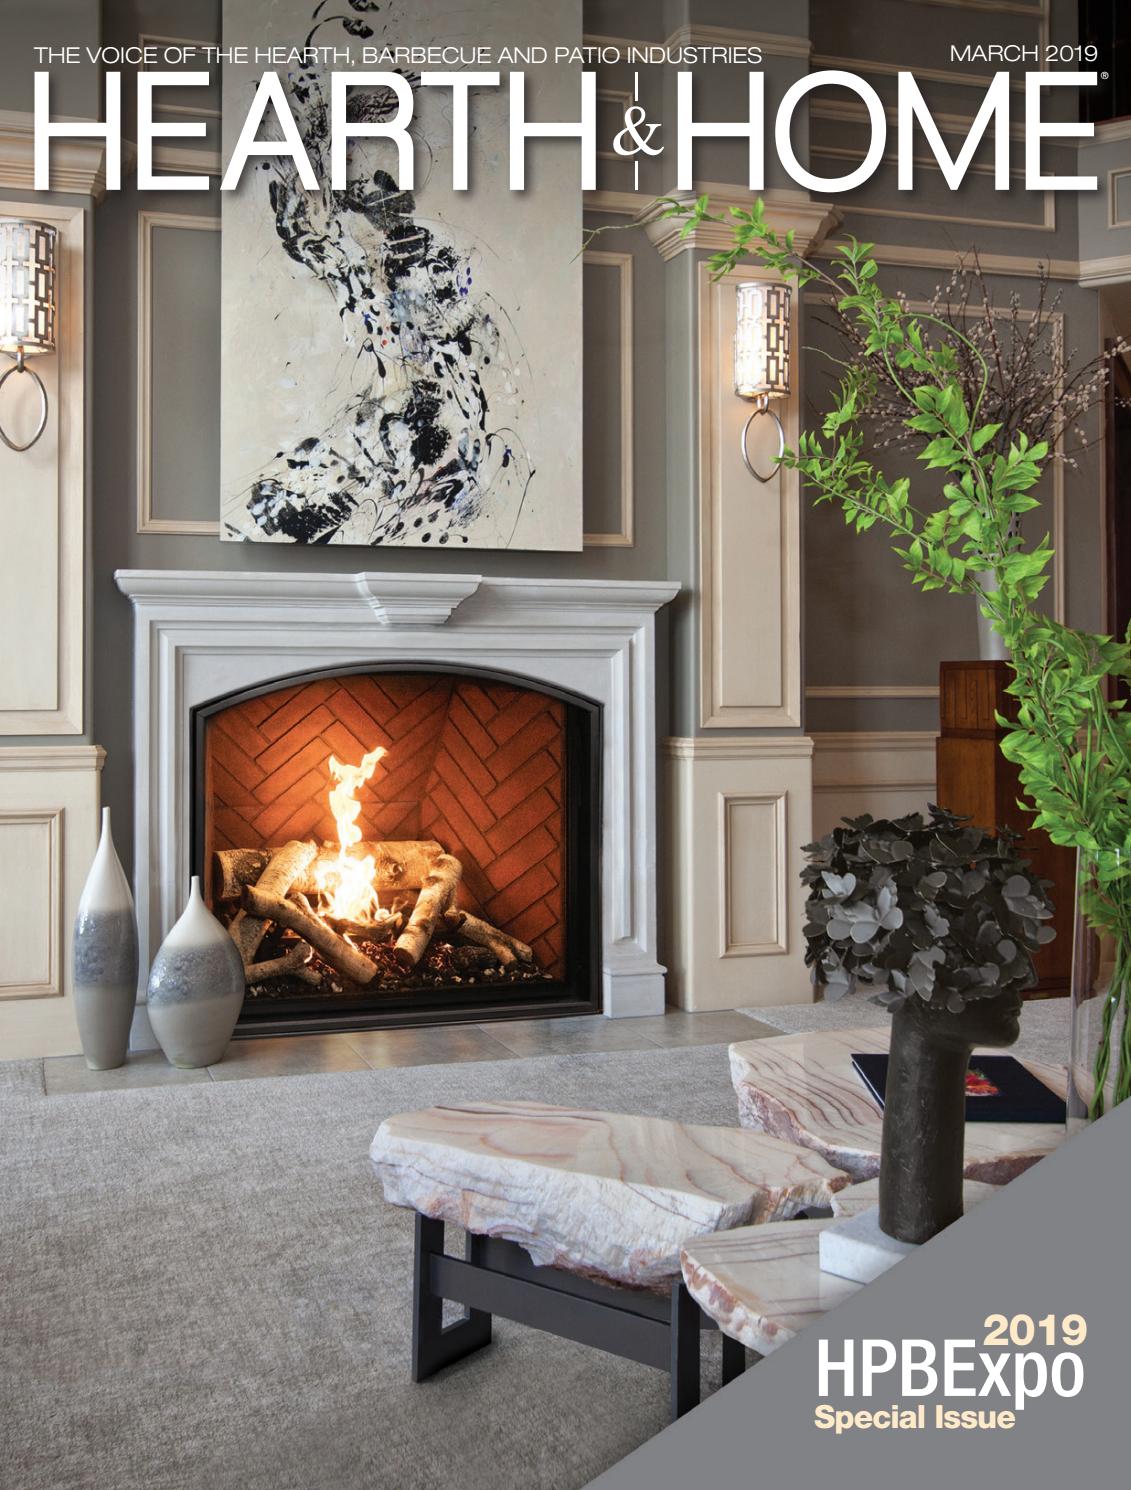 How to Clean Glass Fireplace Doors Awesome Hearth & Home Magazine – 2019 March issue by Hearth & Home